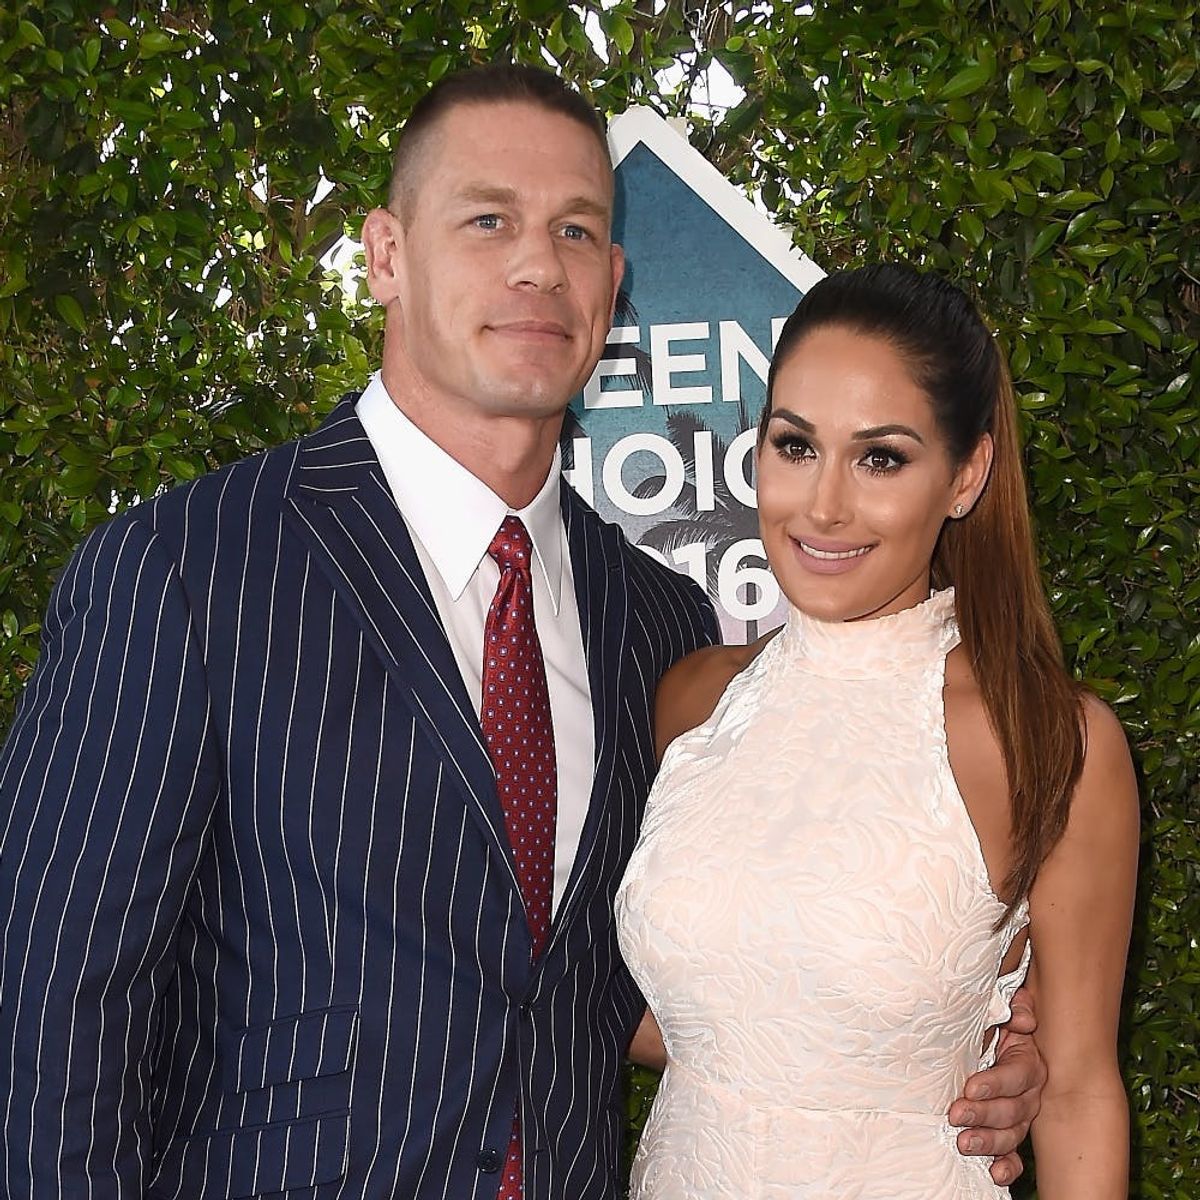 John Cena’s Proposal Story Has a Very Unconventional Twist